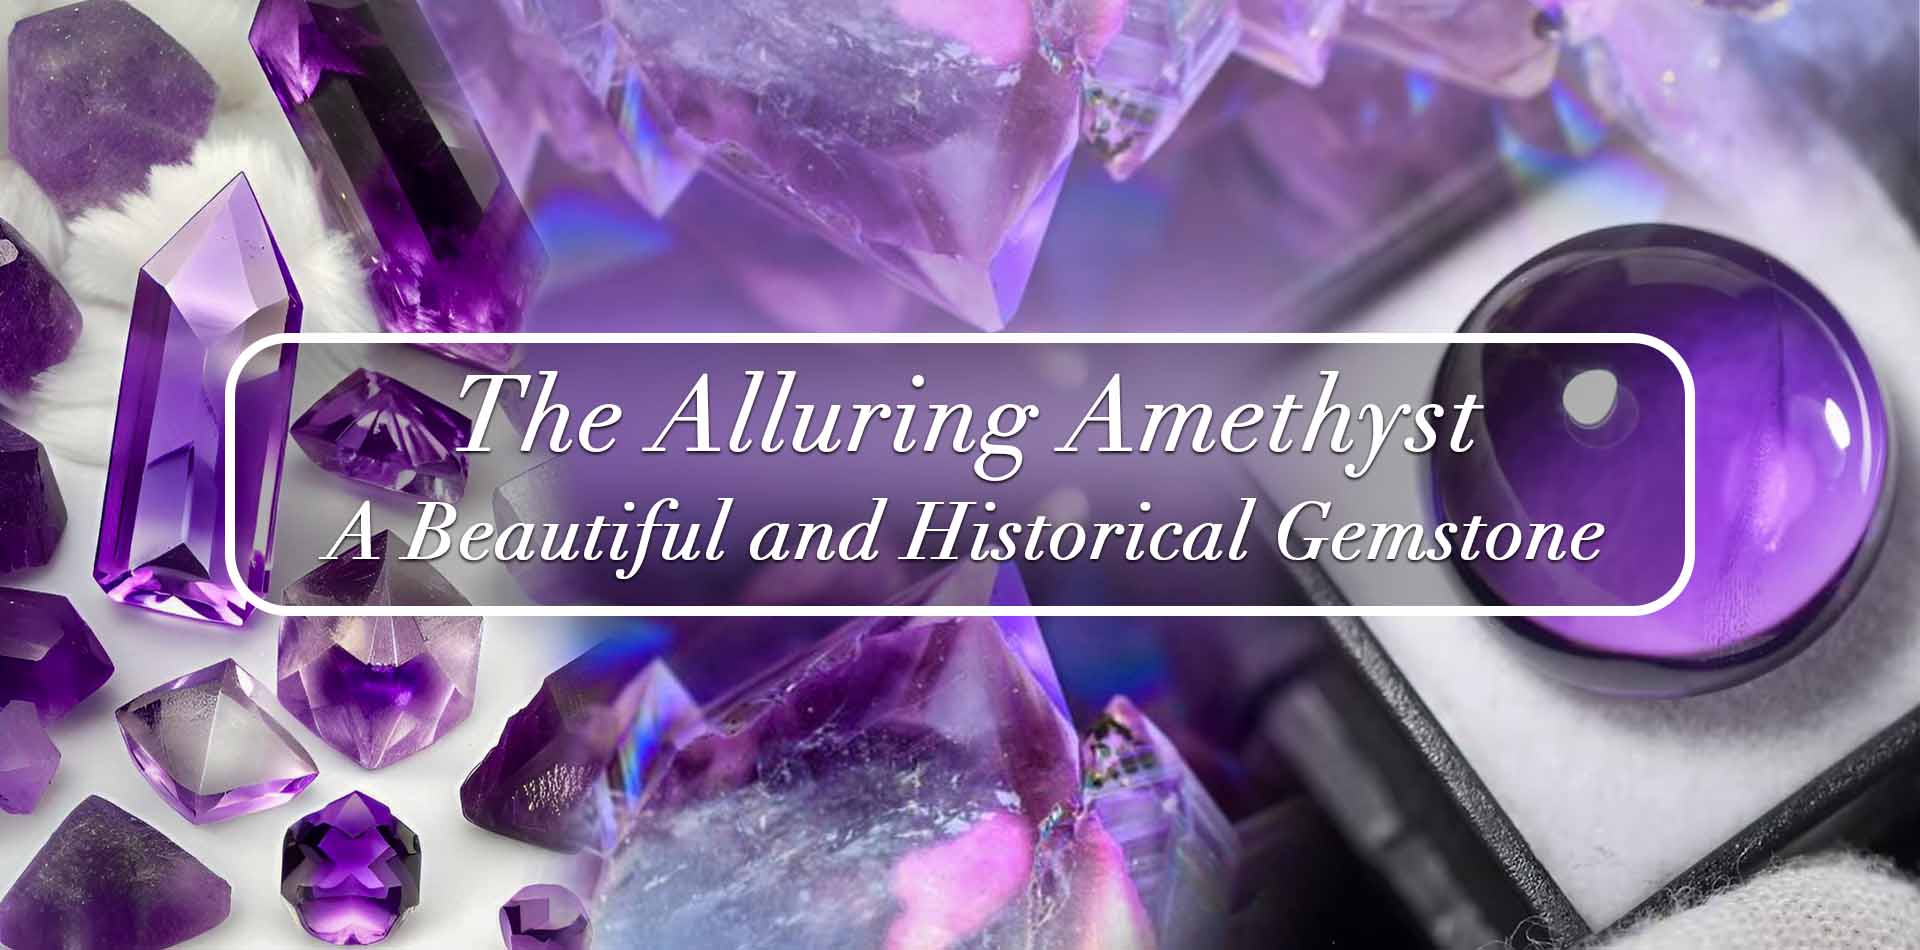 The Alluring Amethyst: A Beautiful and Historical Gemstone